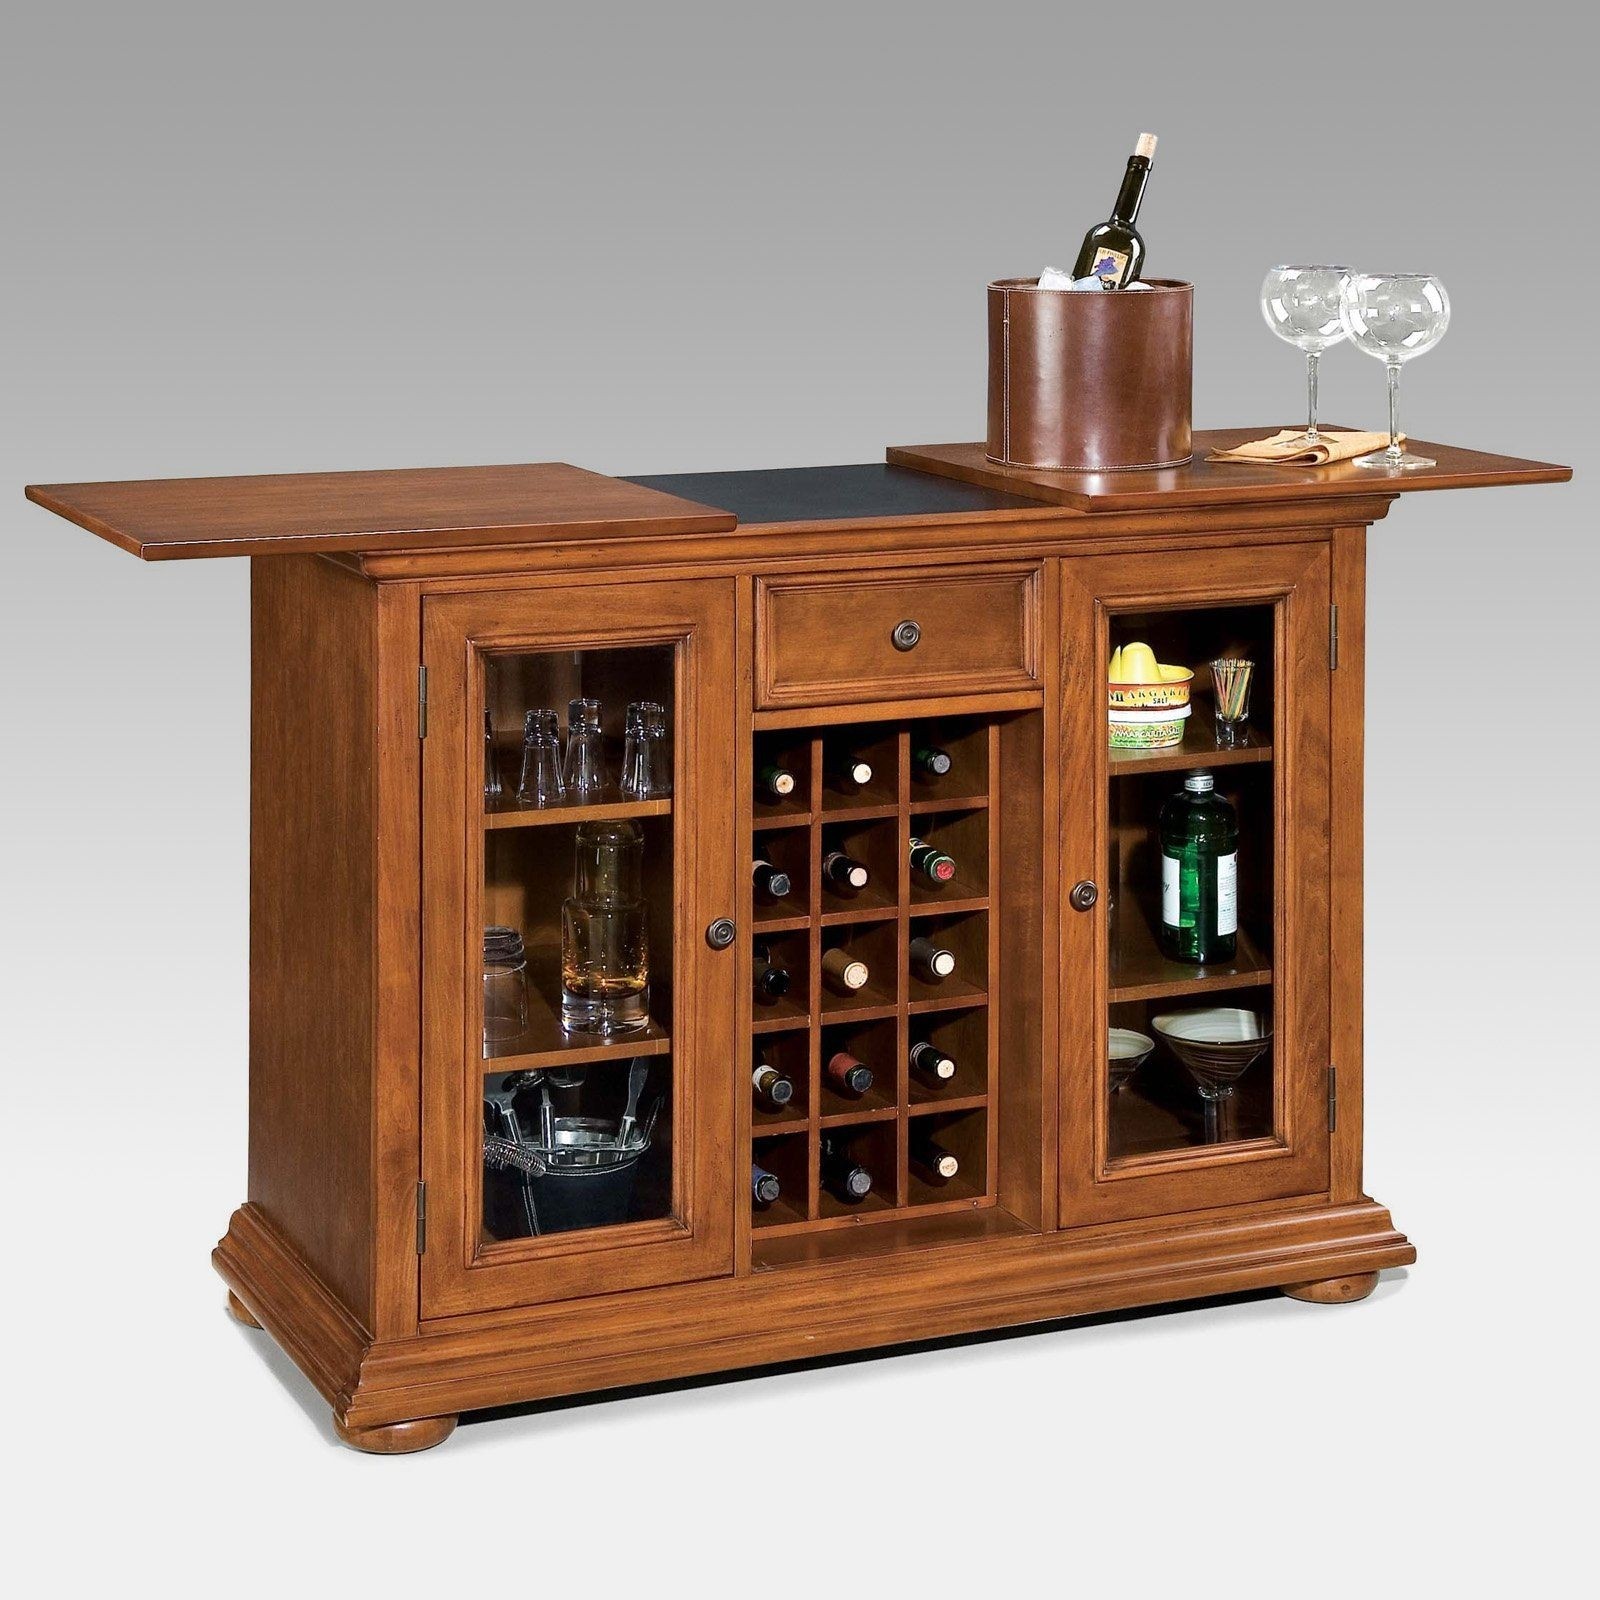 Homestead bar cabinets for home indoor